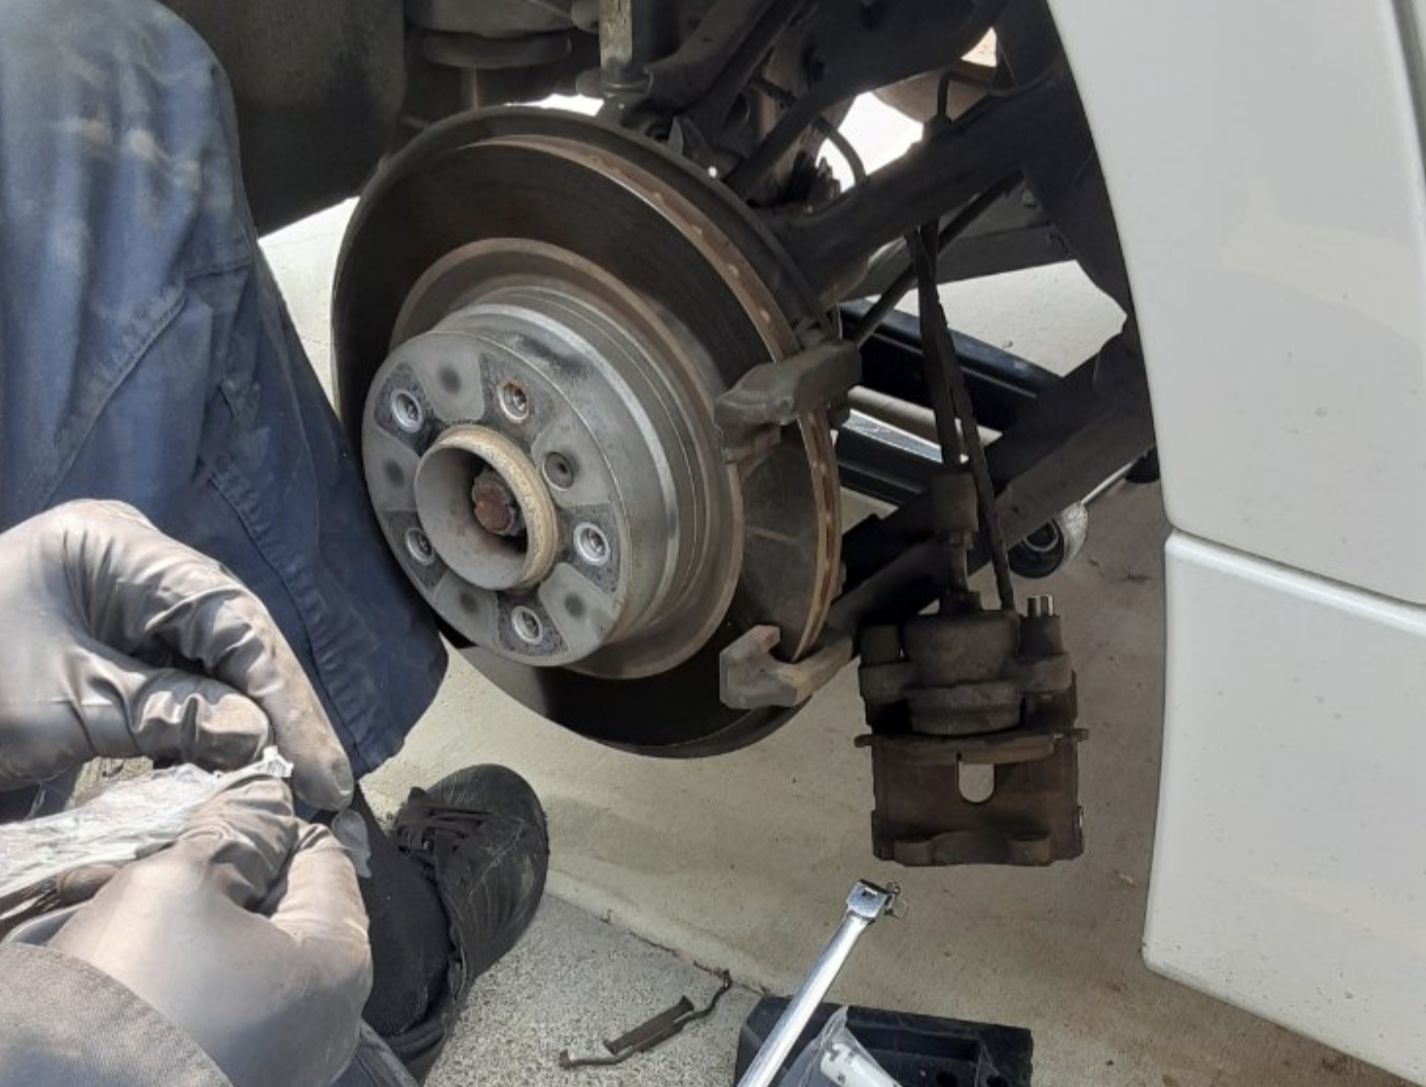 this image shows brake service in Cleveland, OH